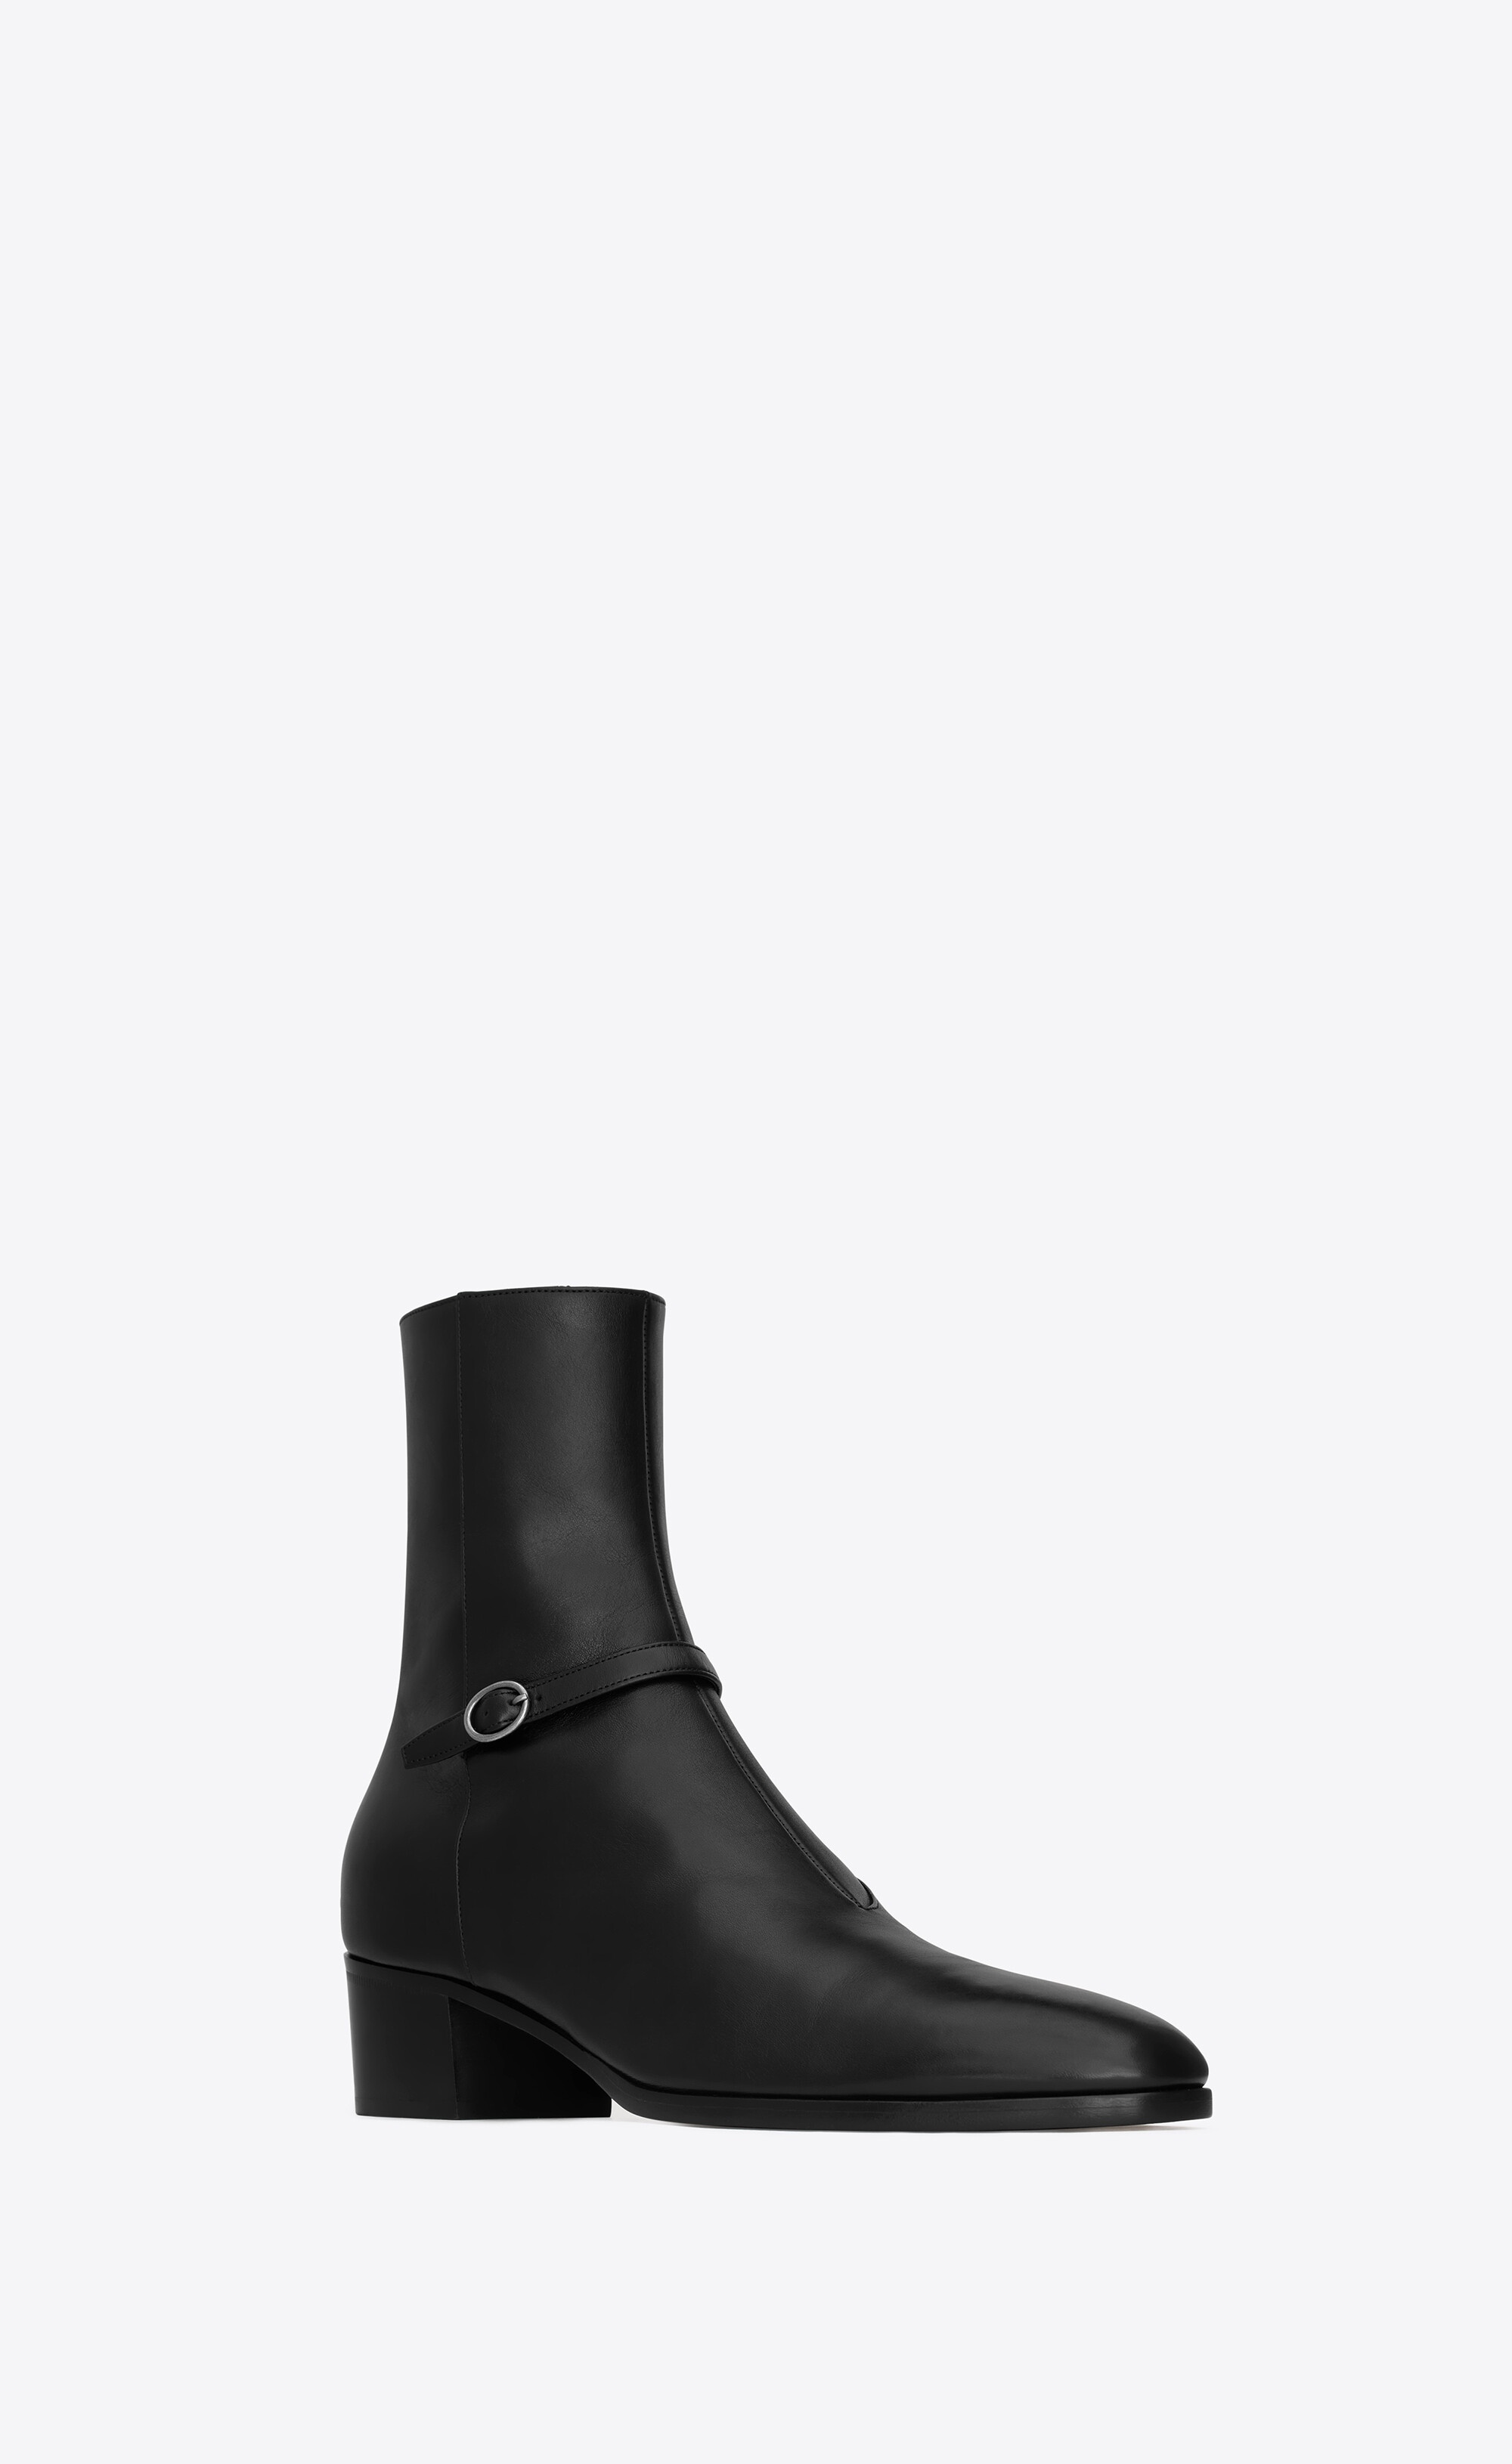 vlad zipped boots in smooth leather - 4